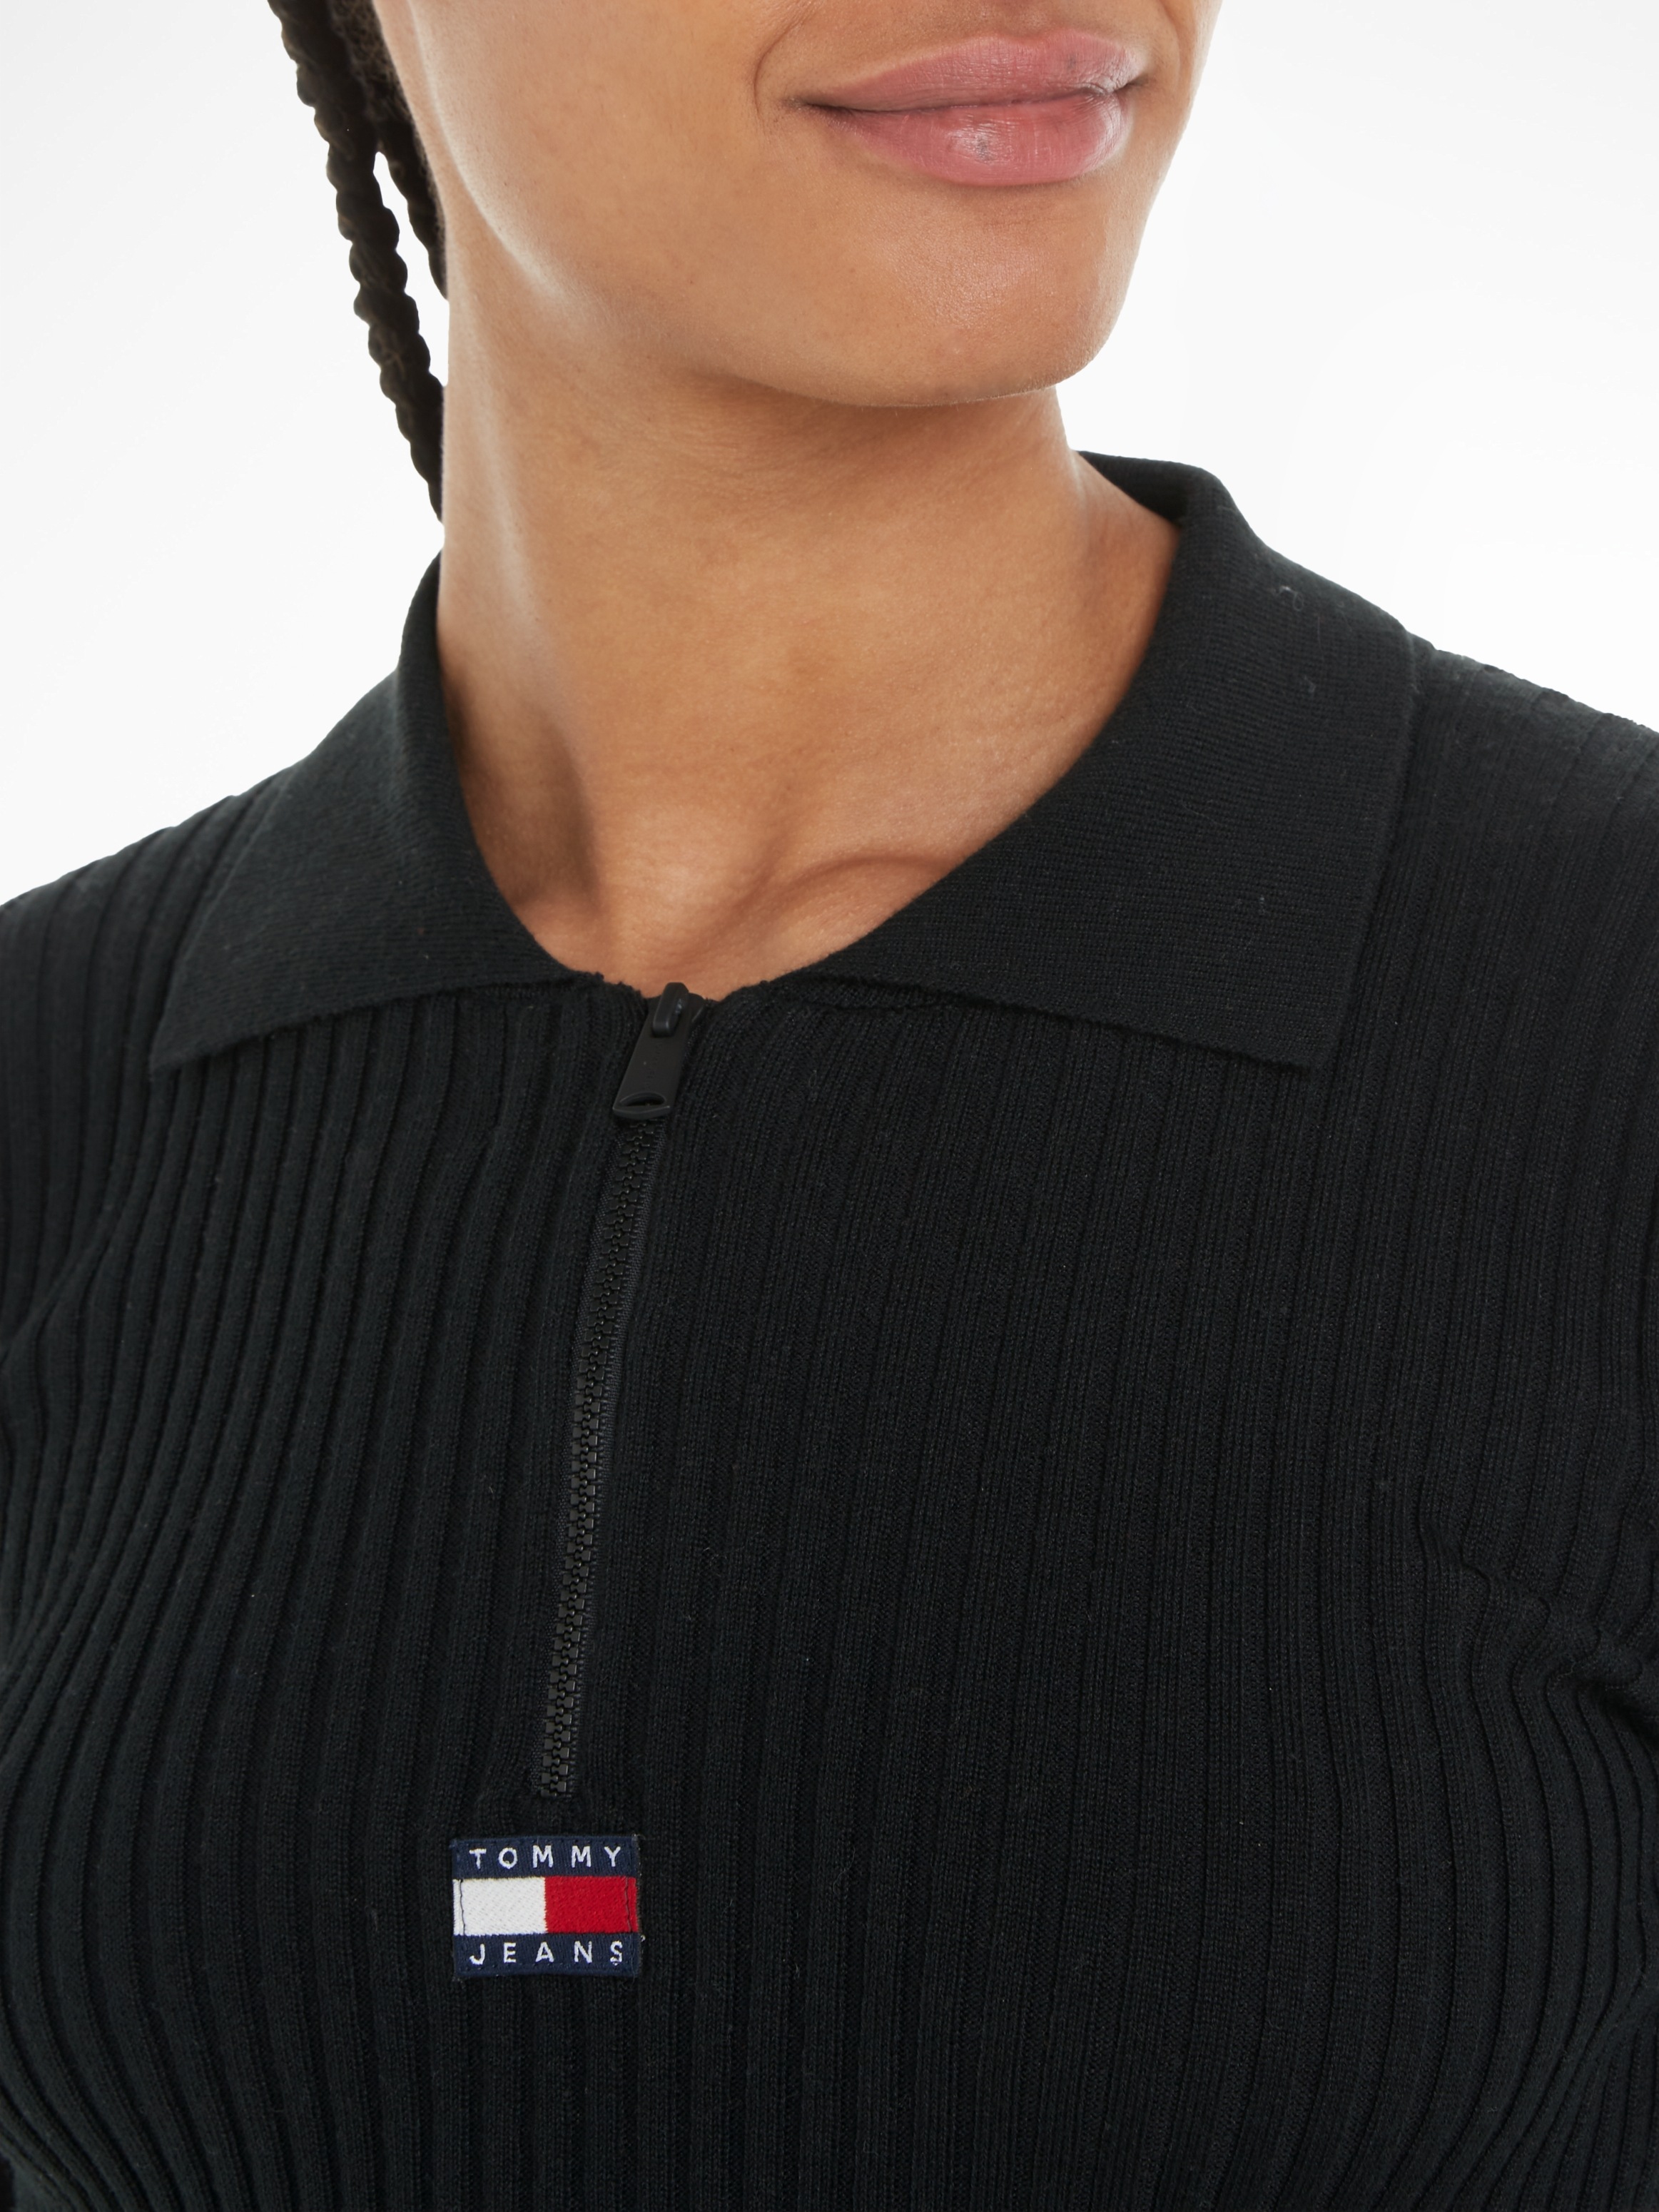 Tommy Jeans Strickpullover, mit Tommy Jeans Markenlabel